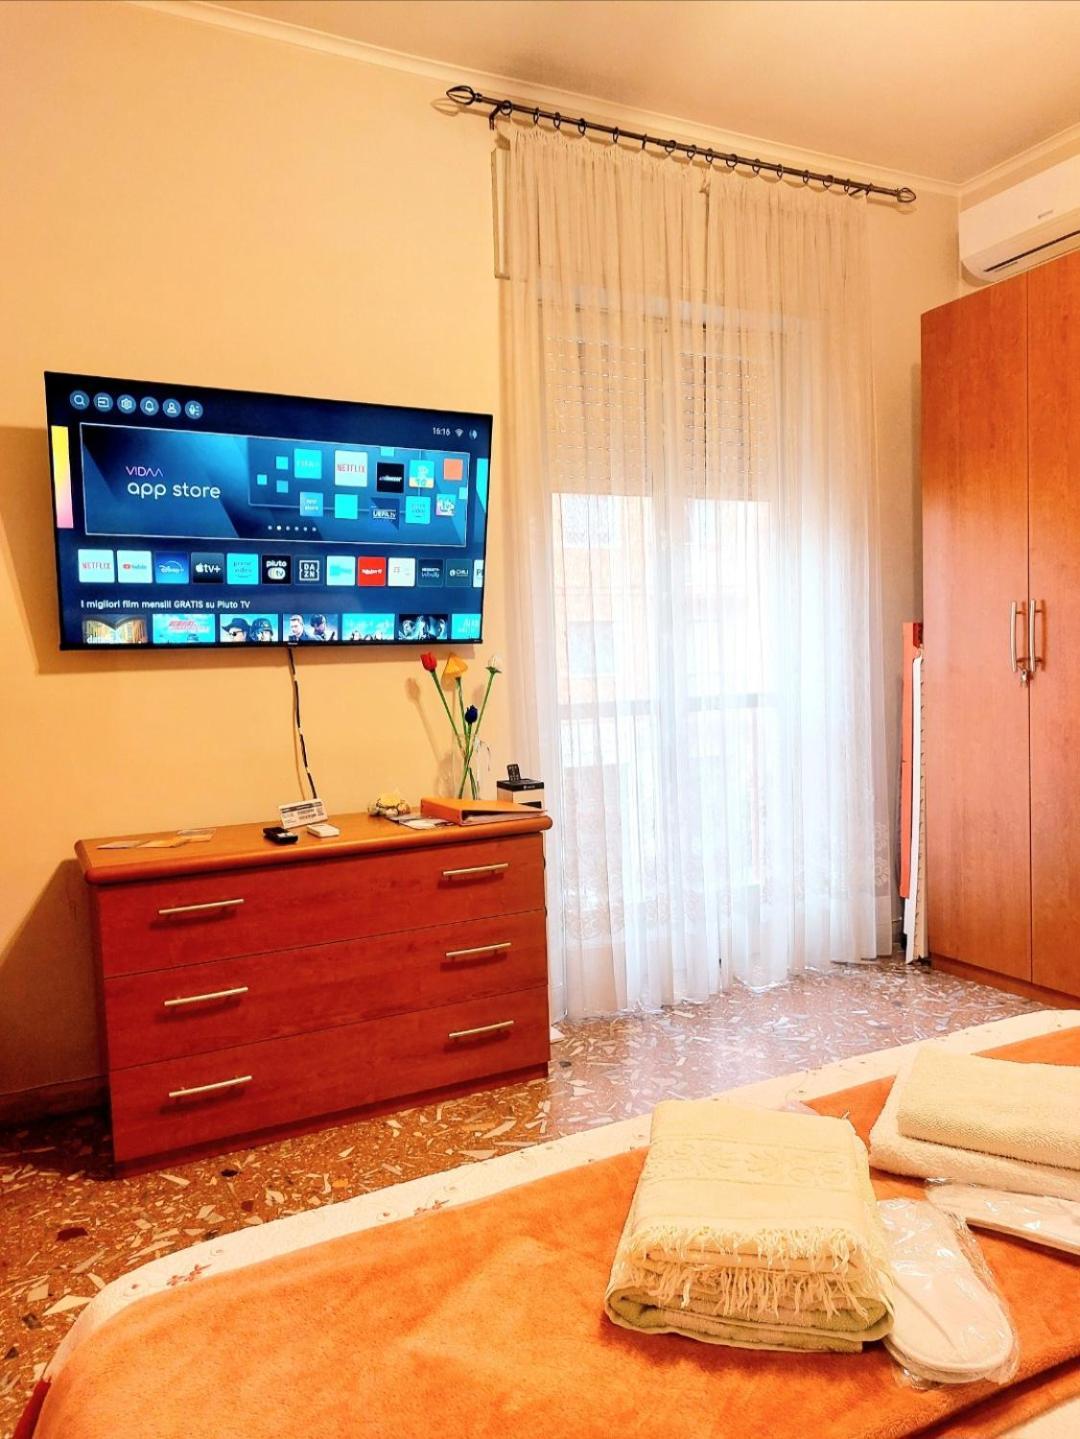 Whole Flat Close Beach Breakfast Kitchen Air Conditioning Laundry Shuttle Airport Wi-Fi Car Parking Netflix Balconies Check In 24H & Metro To Rome 丽都迪奥斯蒂亚 外观 照片